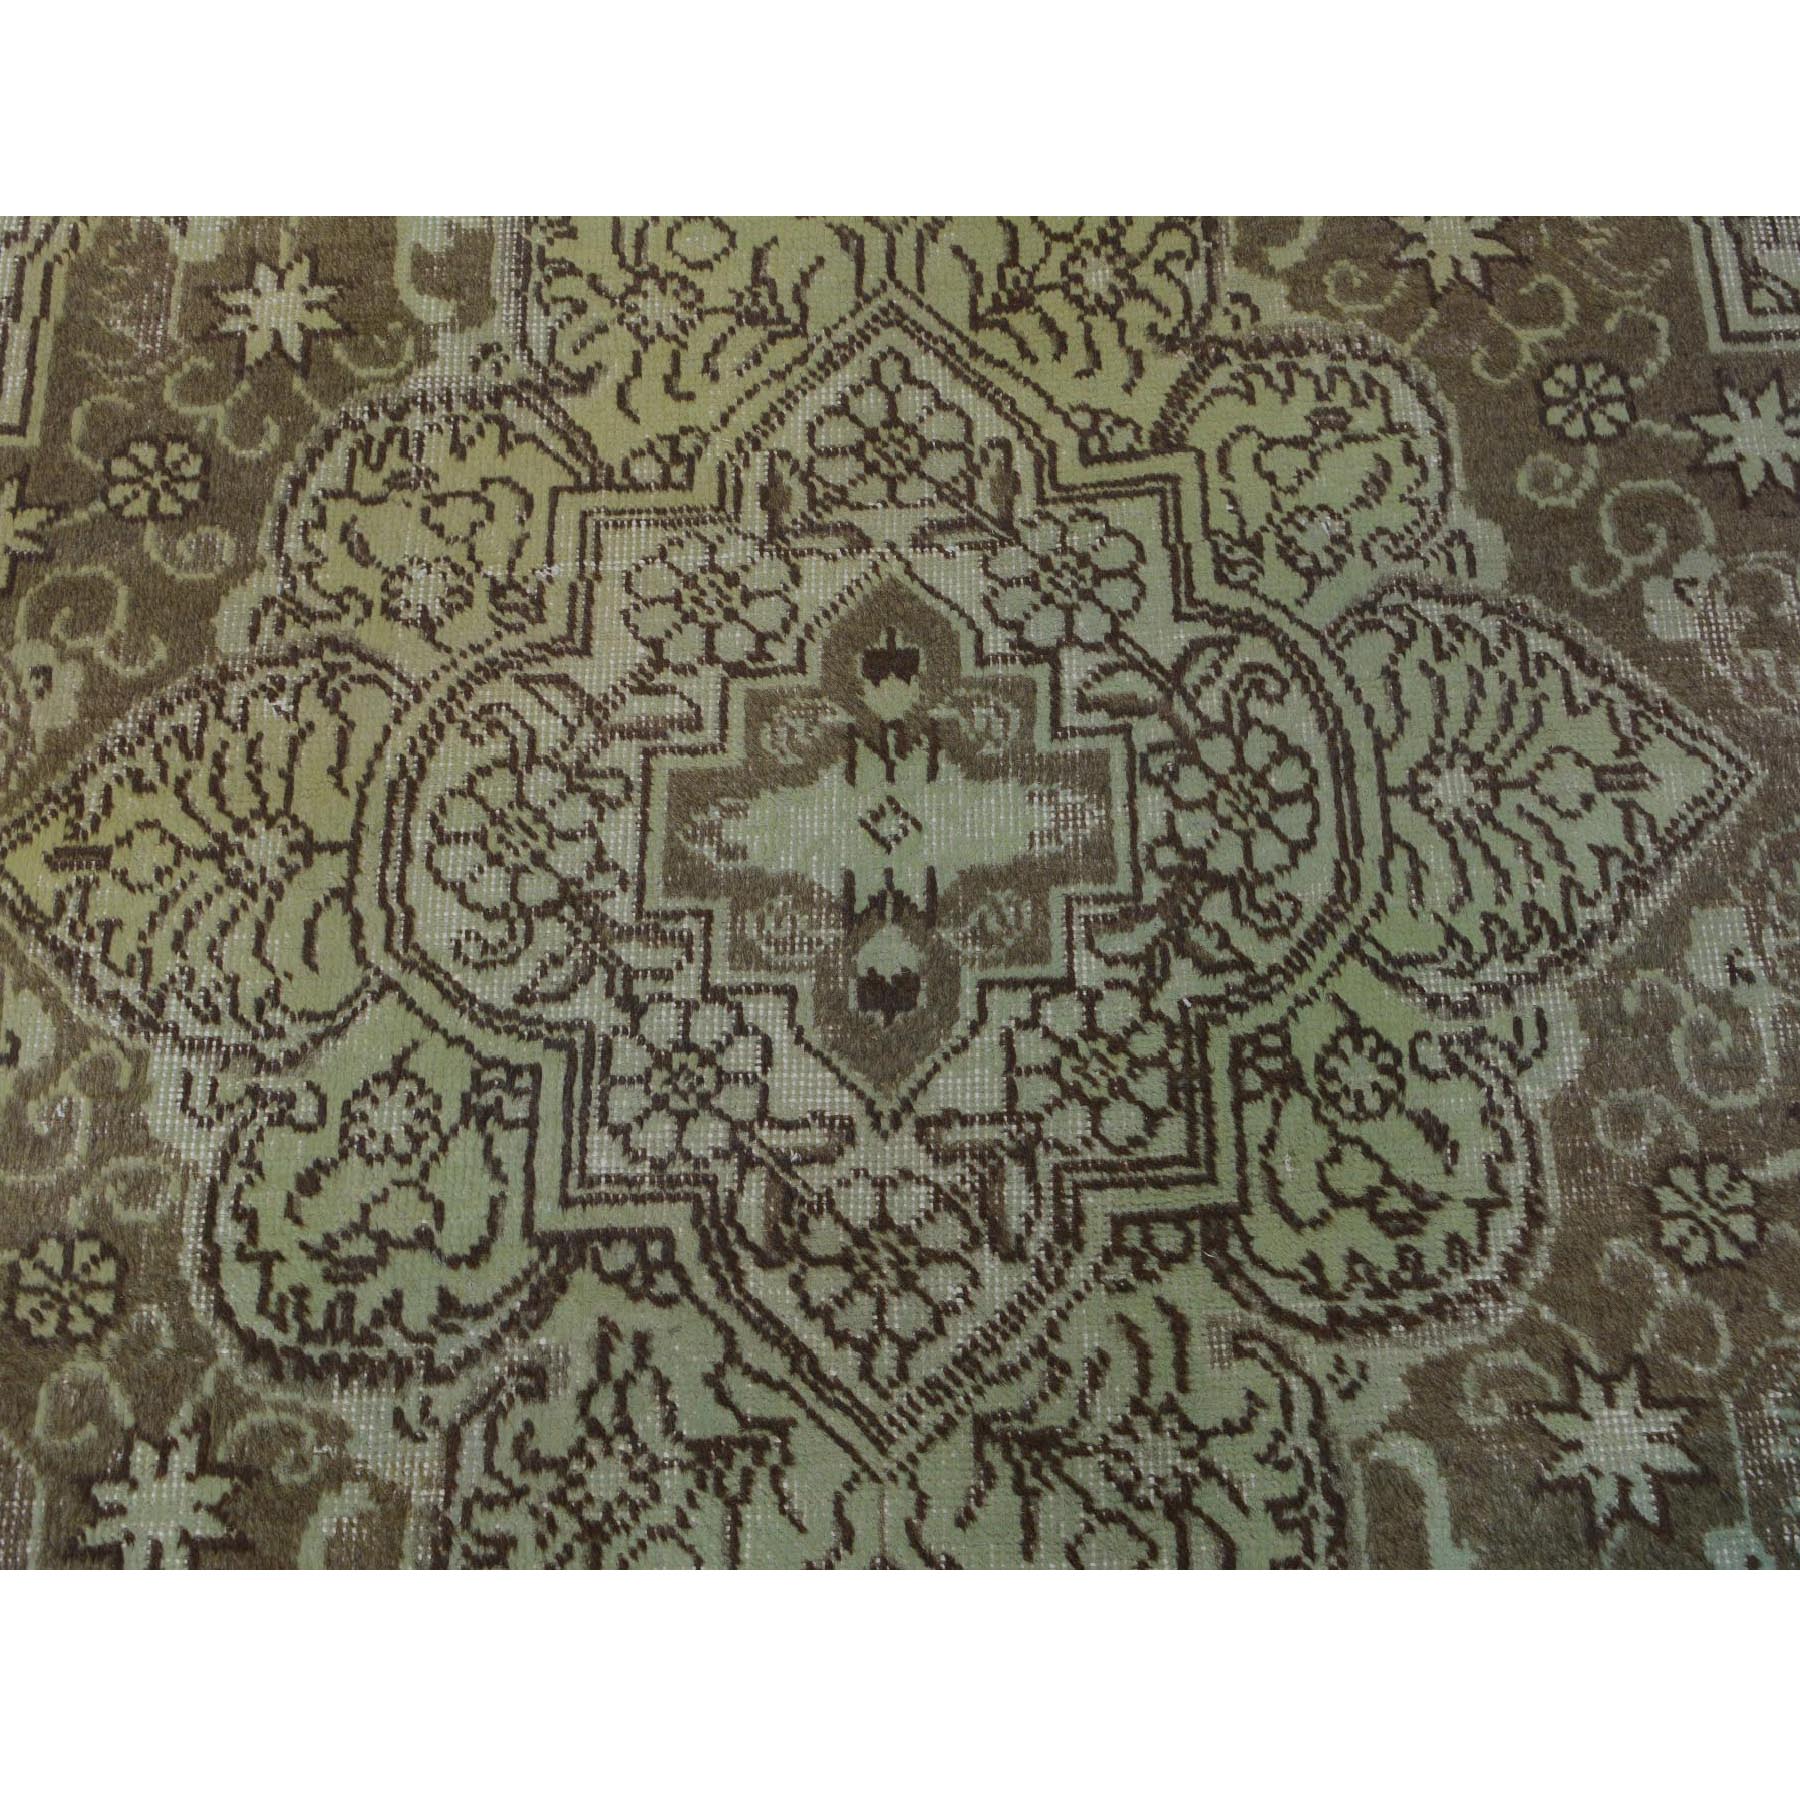 9-7 x12- Yellow Overdyed And Vintage Worn Down Persian Tabriz Pure Wool Oriental Rug 